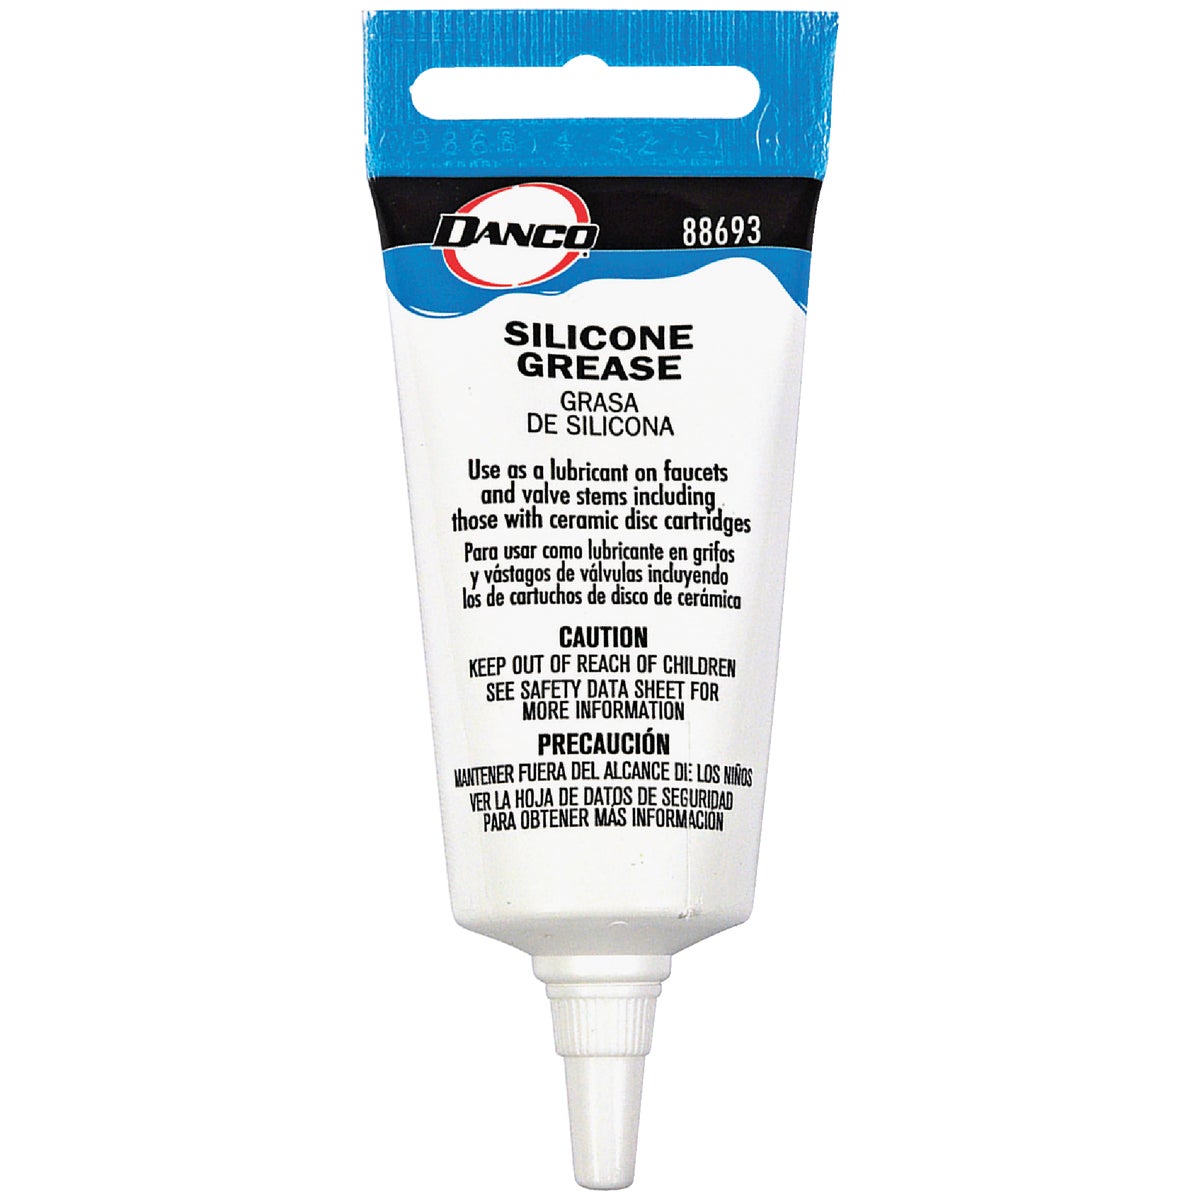 Item 412147, Used to lubricate faucets and help stems to turn smoothly.